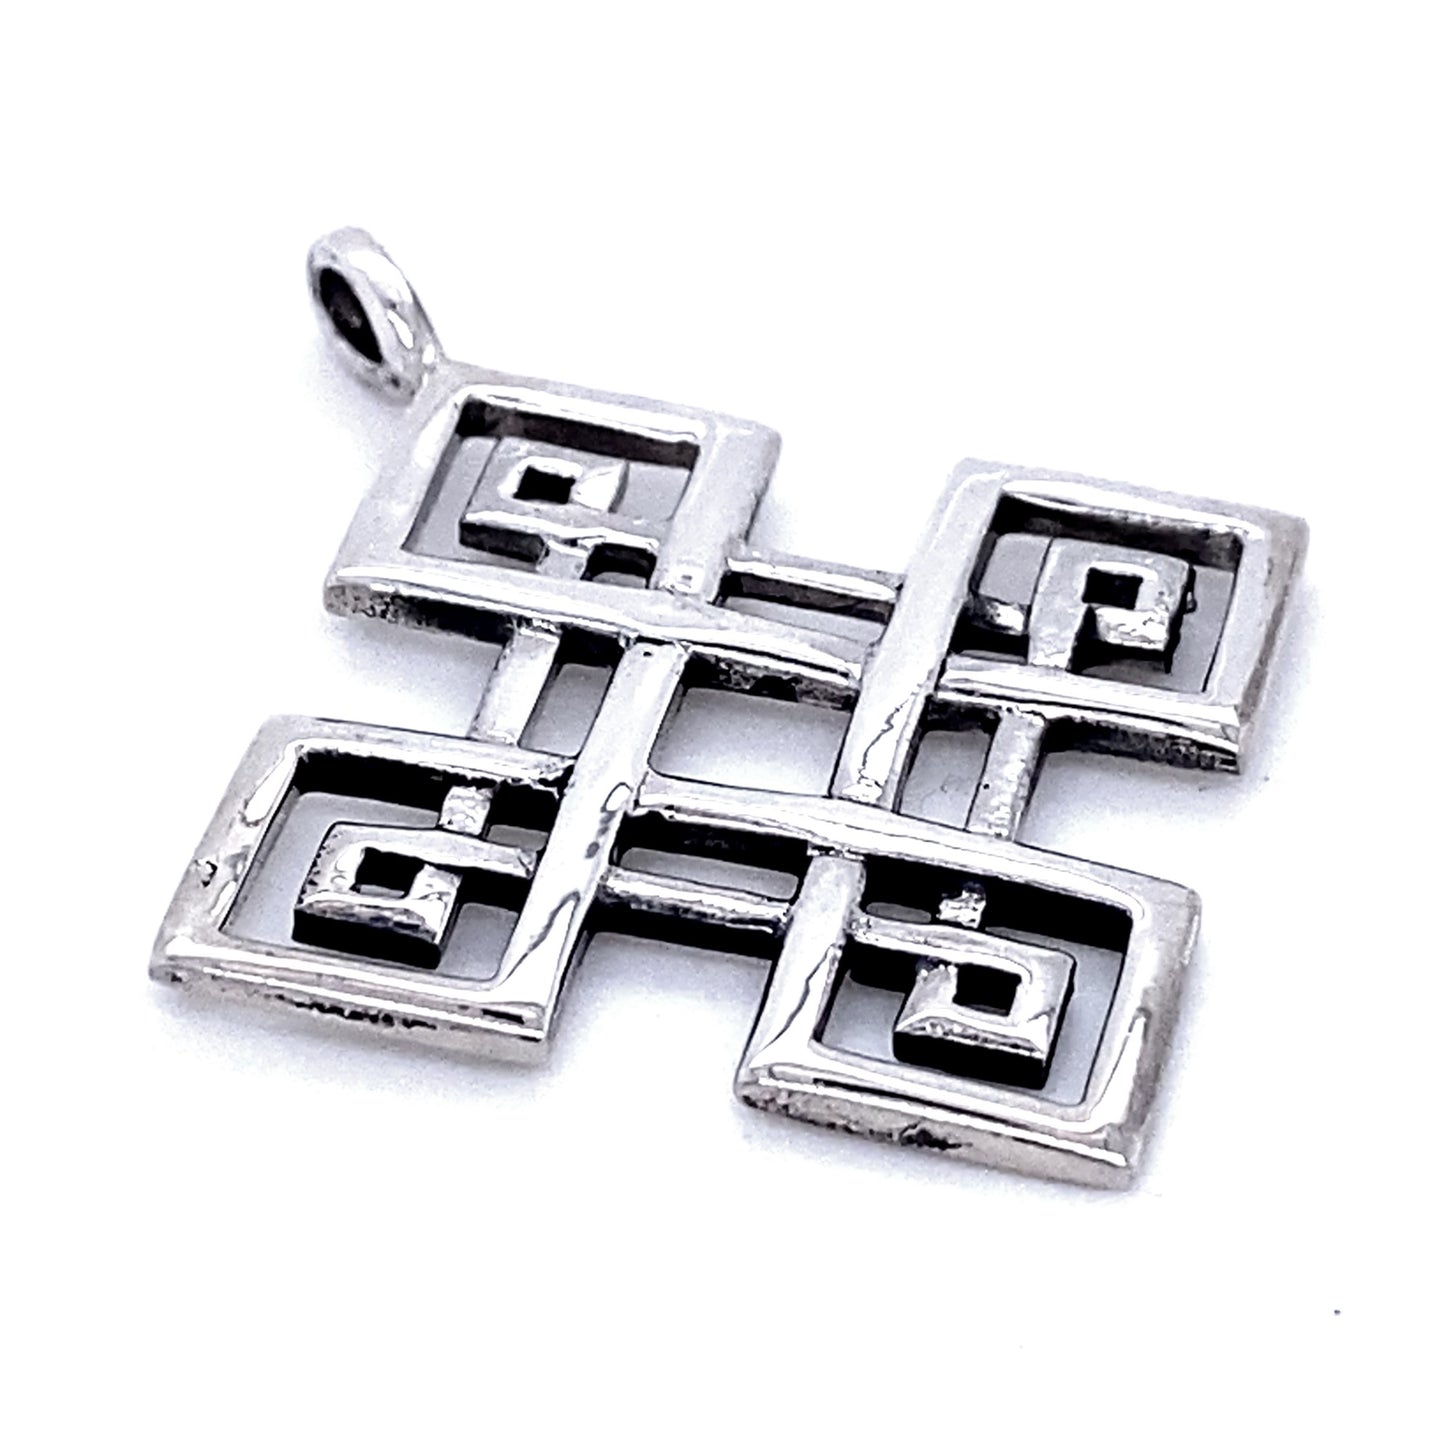 Four-Pointed Celtic Knot Pendant with an intricate geometric design featuring interlocking squares and spirals, reminiscent of a classic Celtic knot.